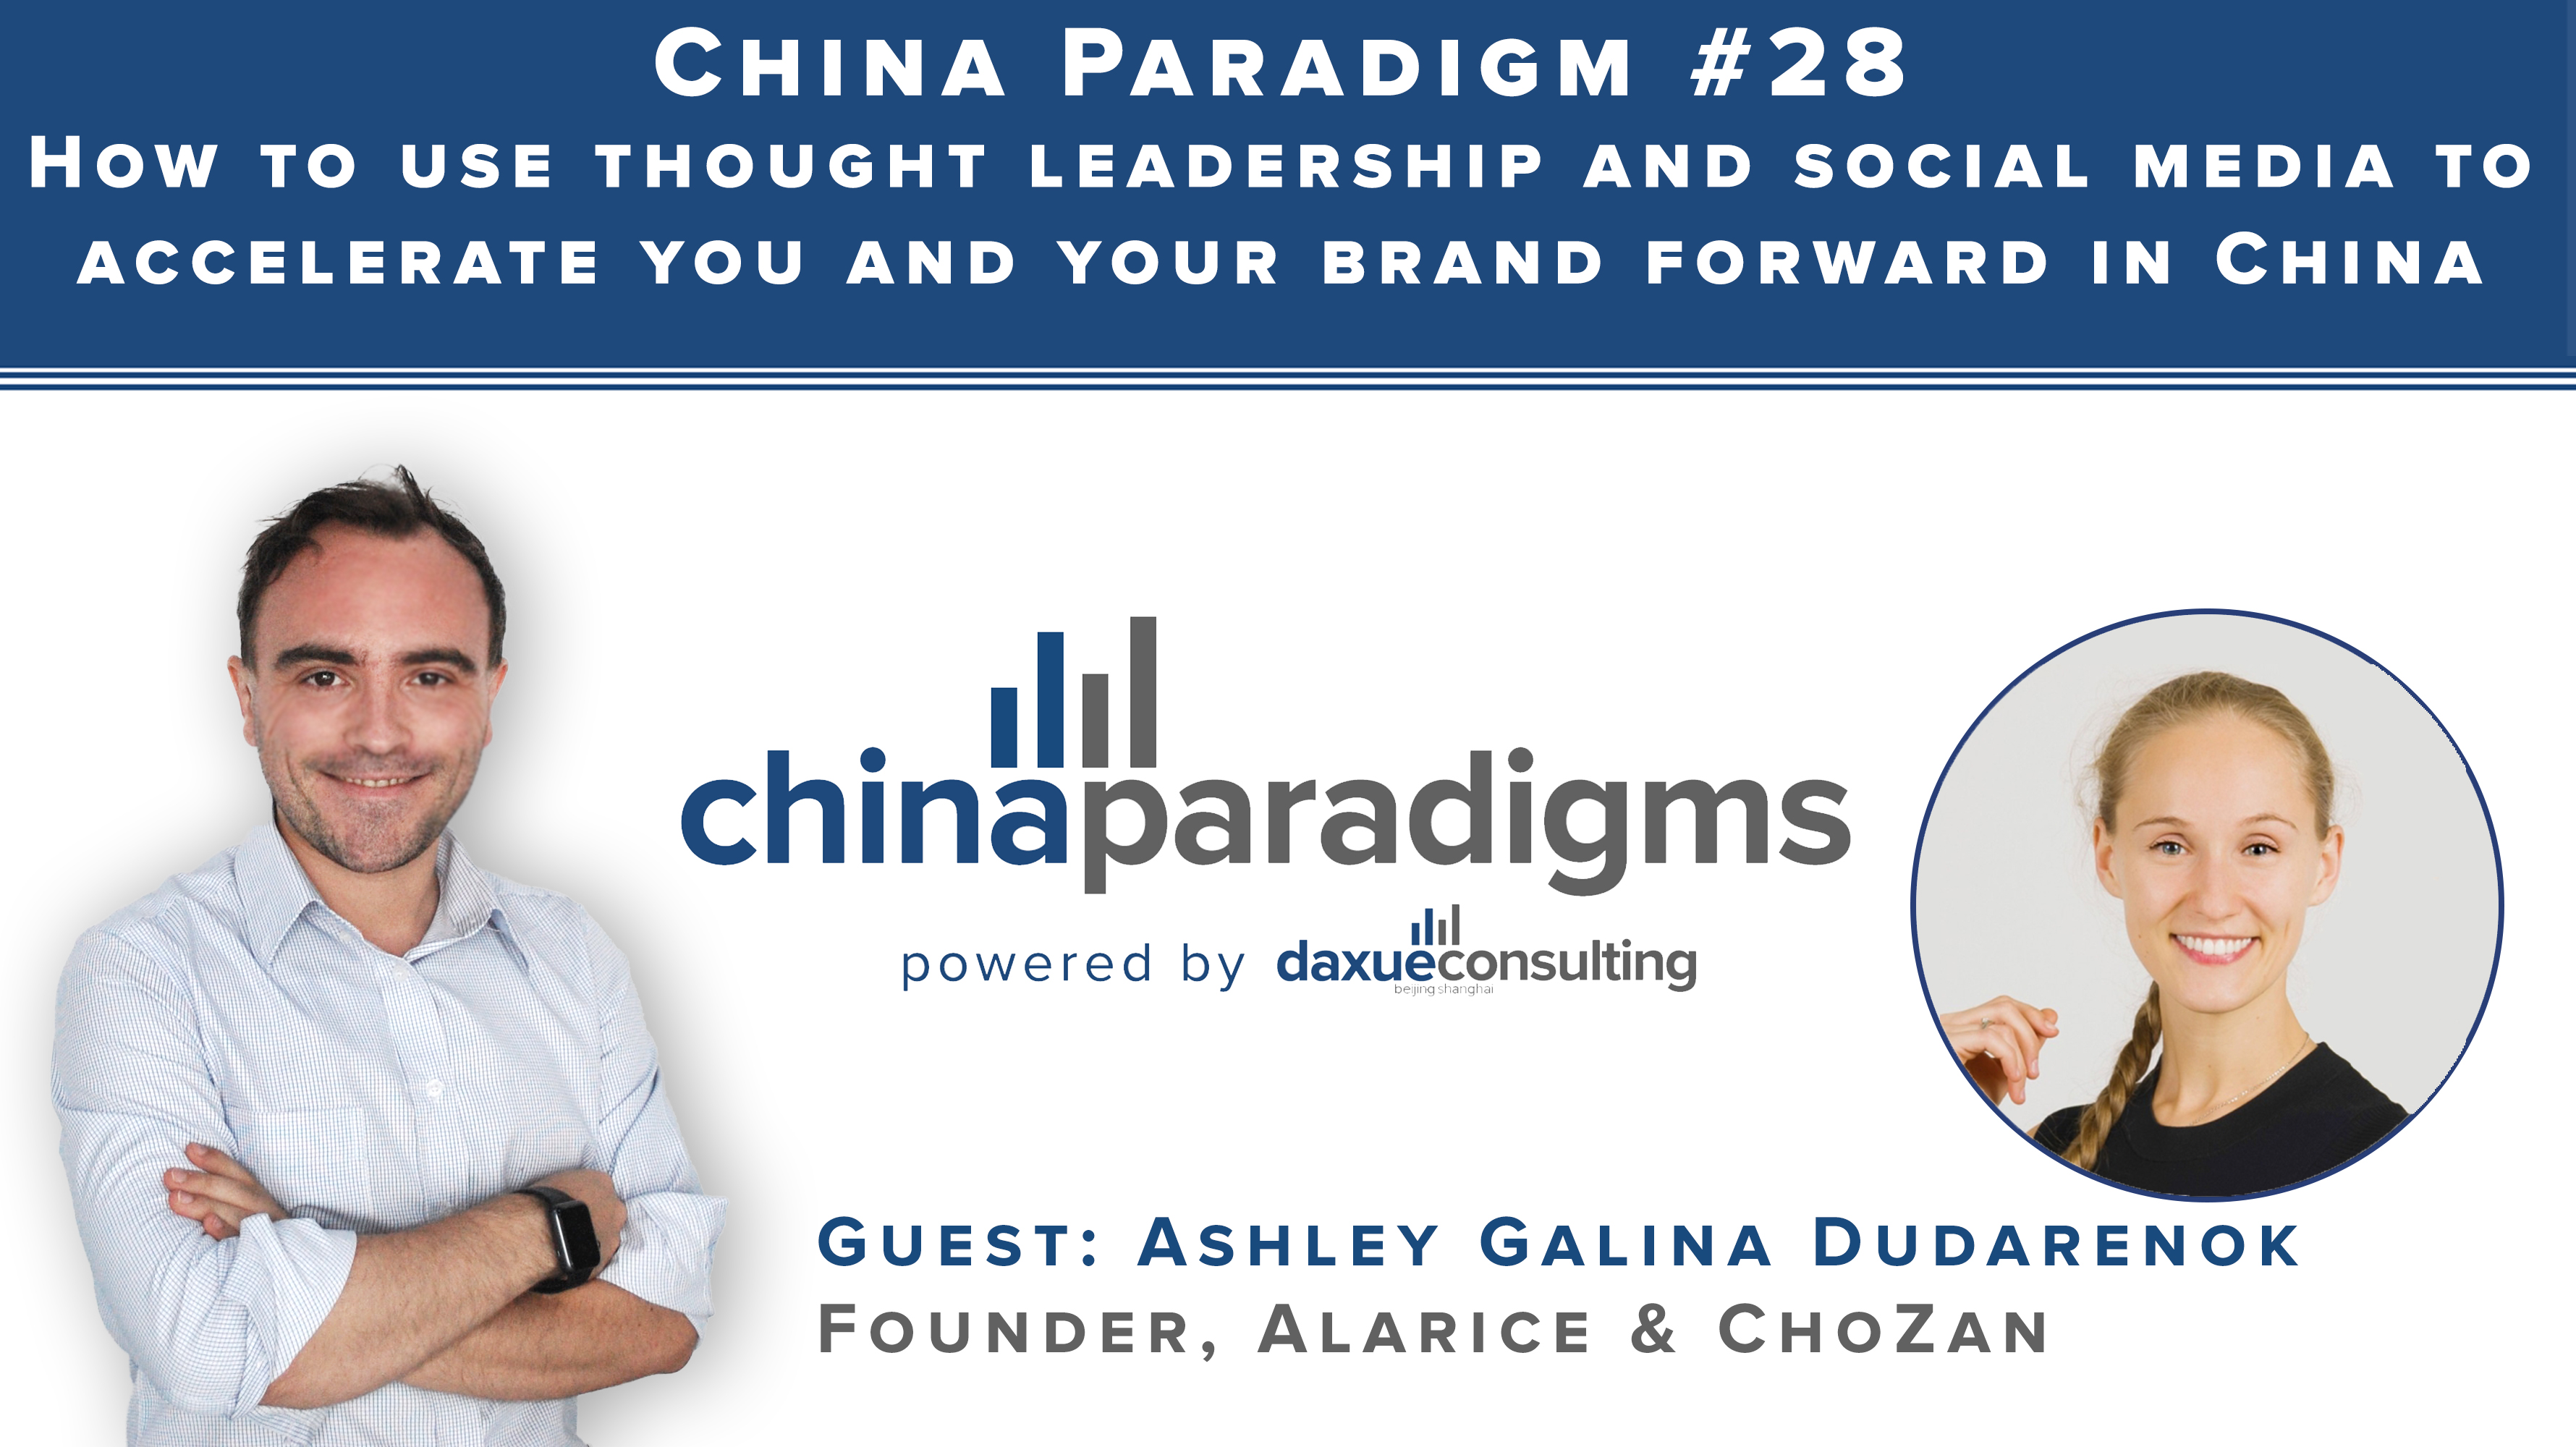 [Podcast] China paradigm #28: Using thought leadership and social media to accelerate your business in China